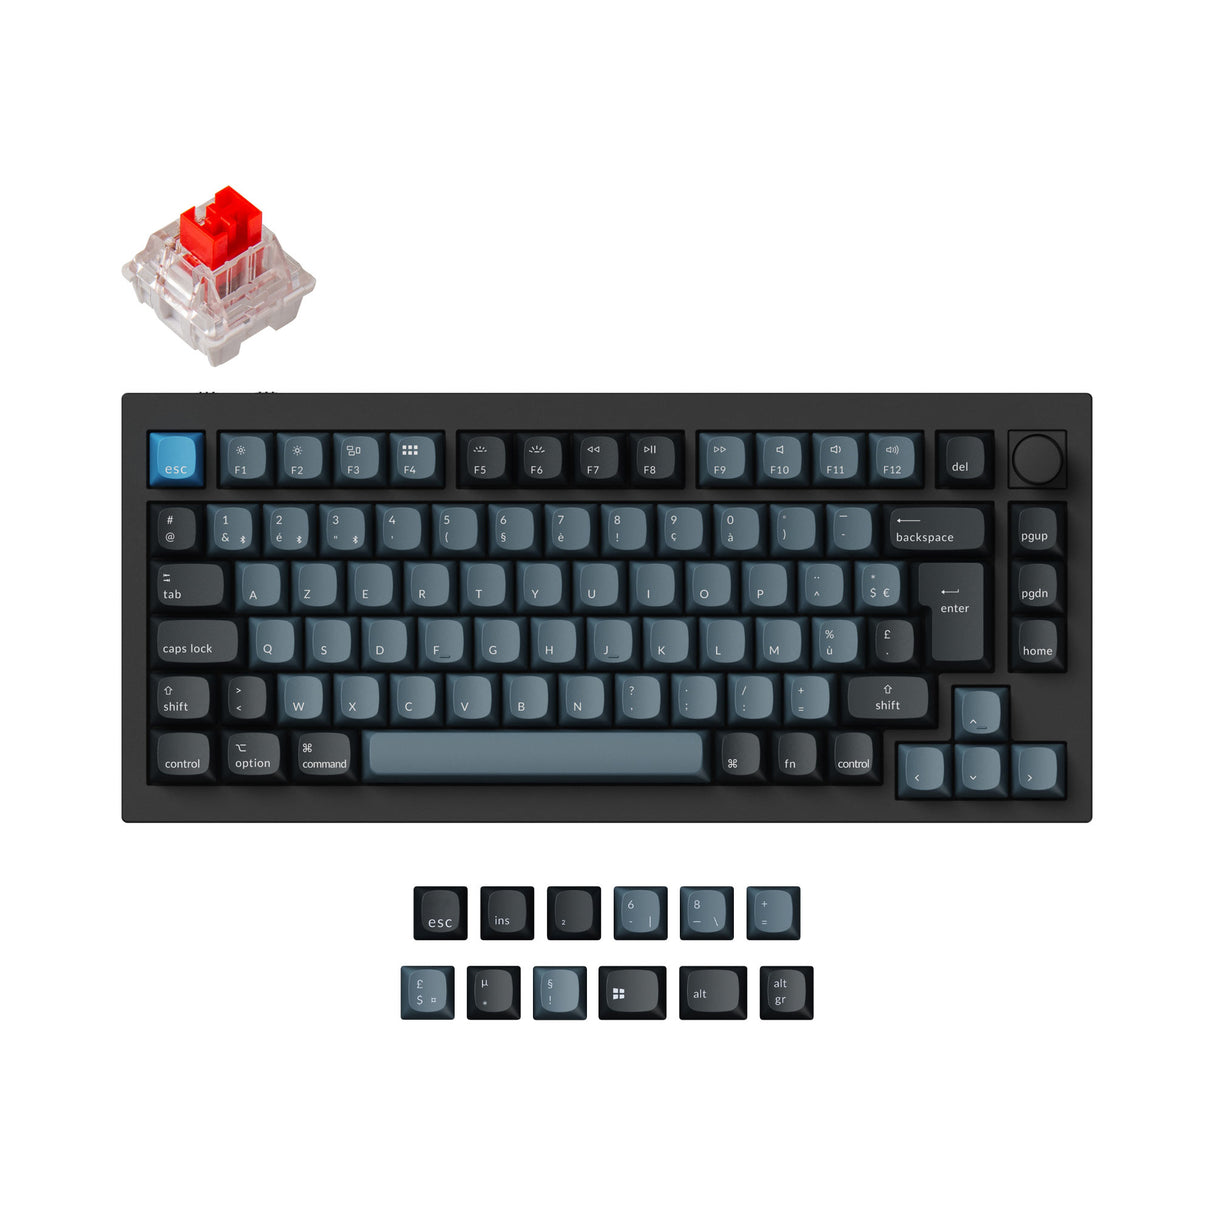 Keychron Q1 Pro QMK/VIA wireless custom mechanical keyboard 75 percent layout aluminum black for Mac WIndows Linux RGB backlight hot-swappable K Pro switch red ISO French layout